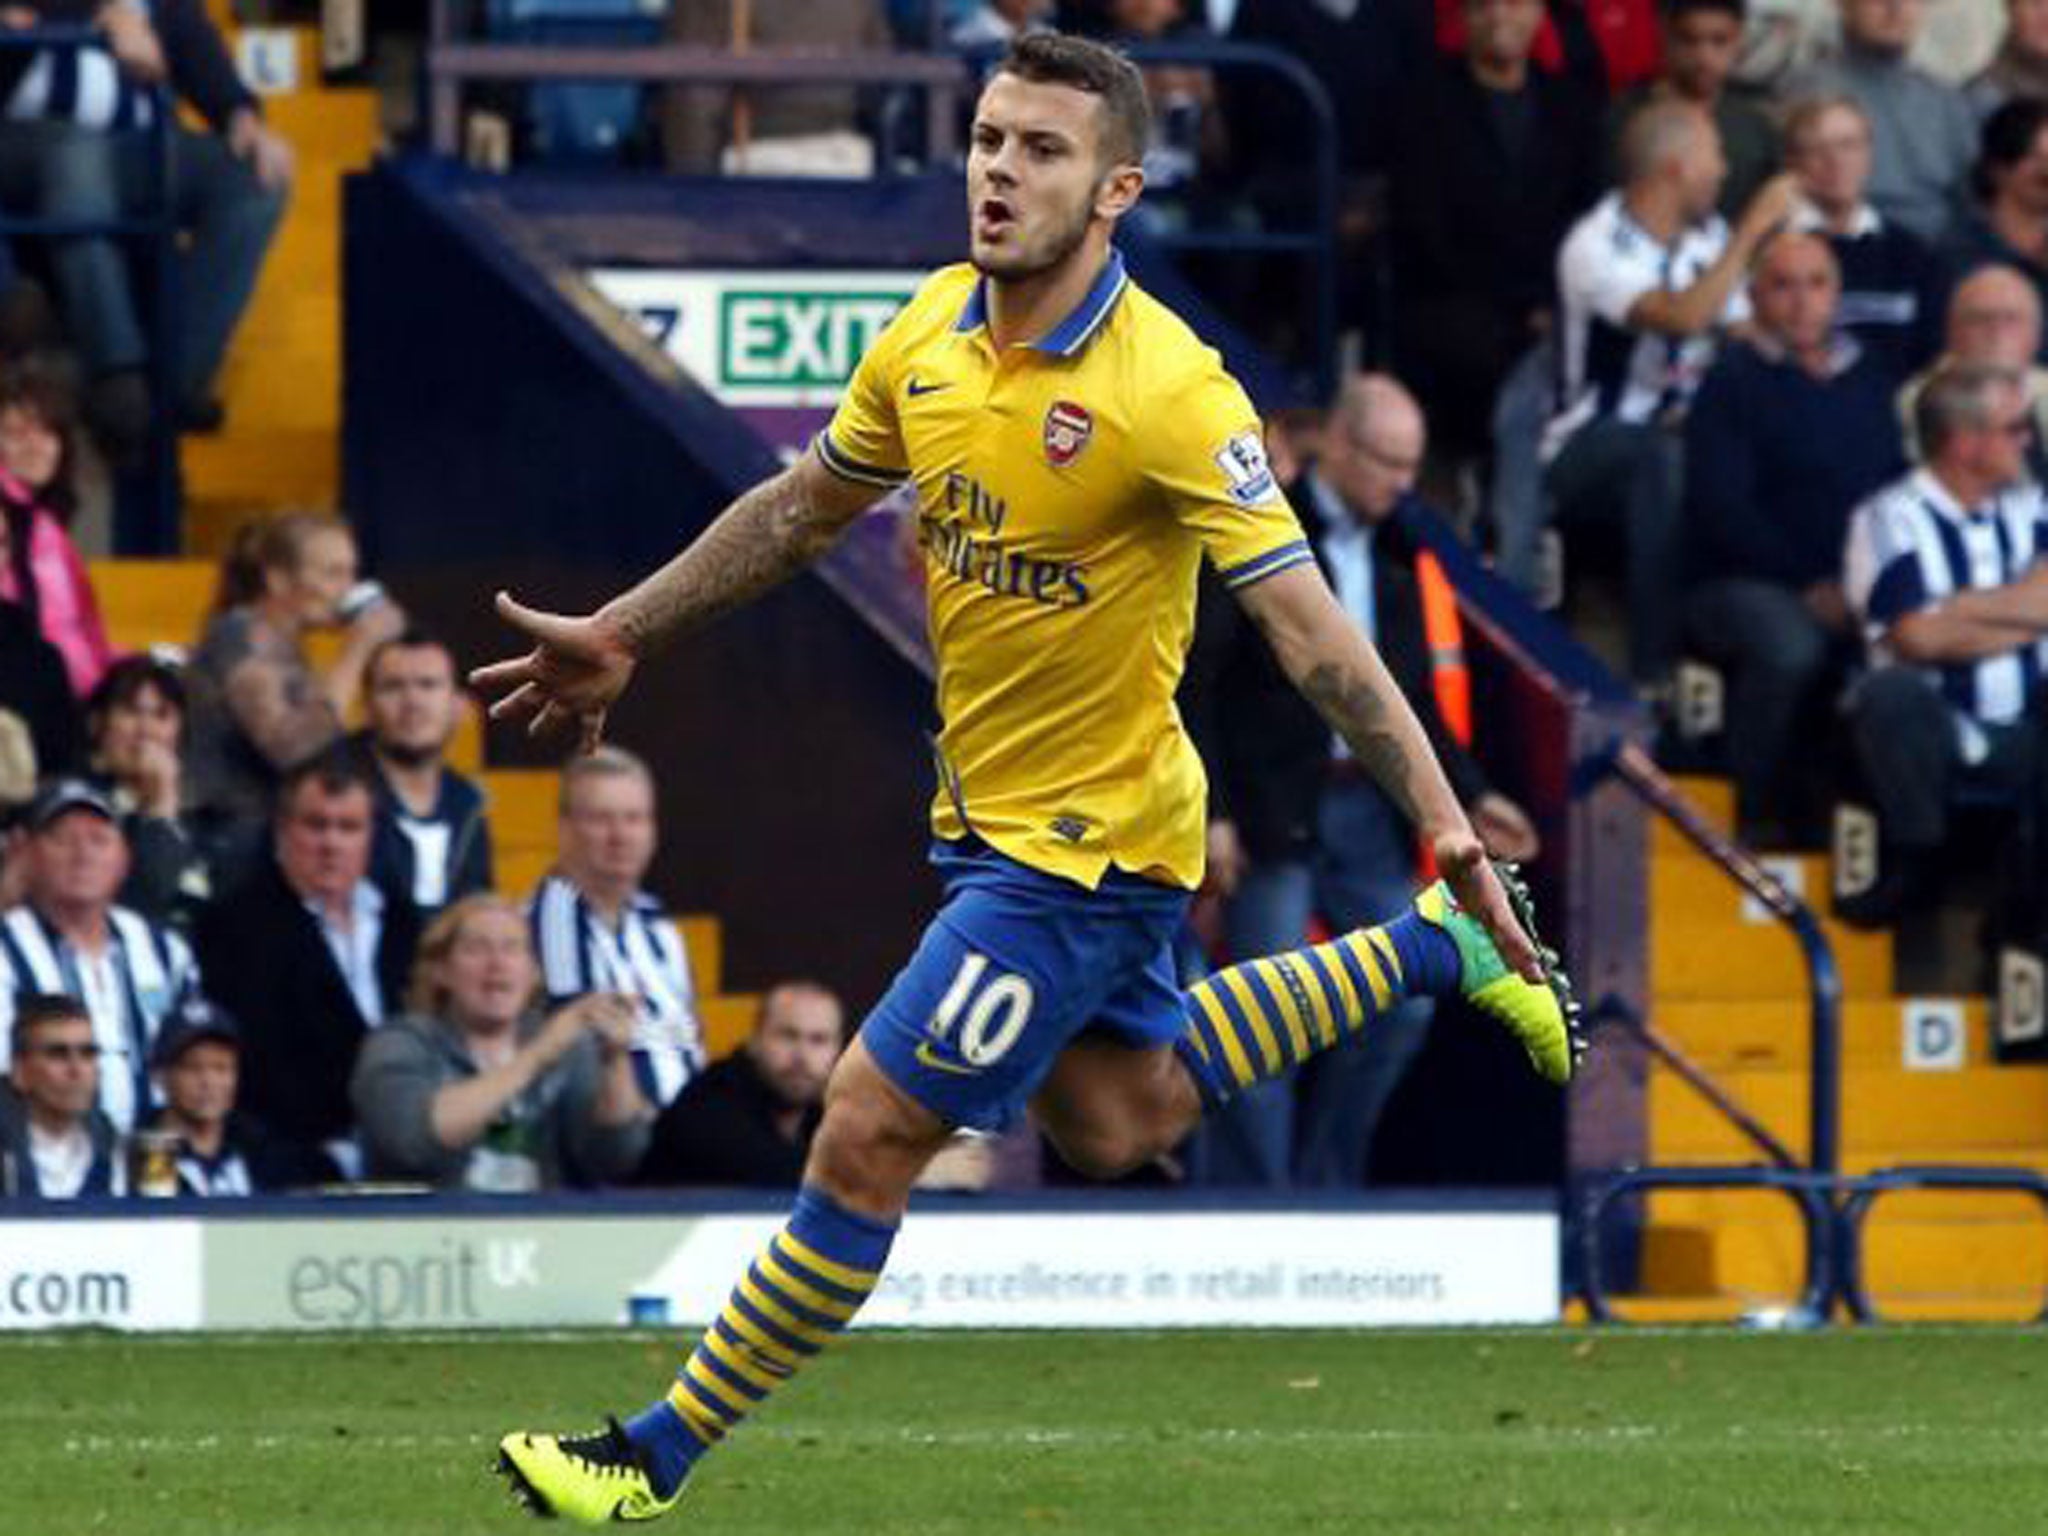 Jack Wilshere celebrates his goal for Arsenal against West Brom